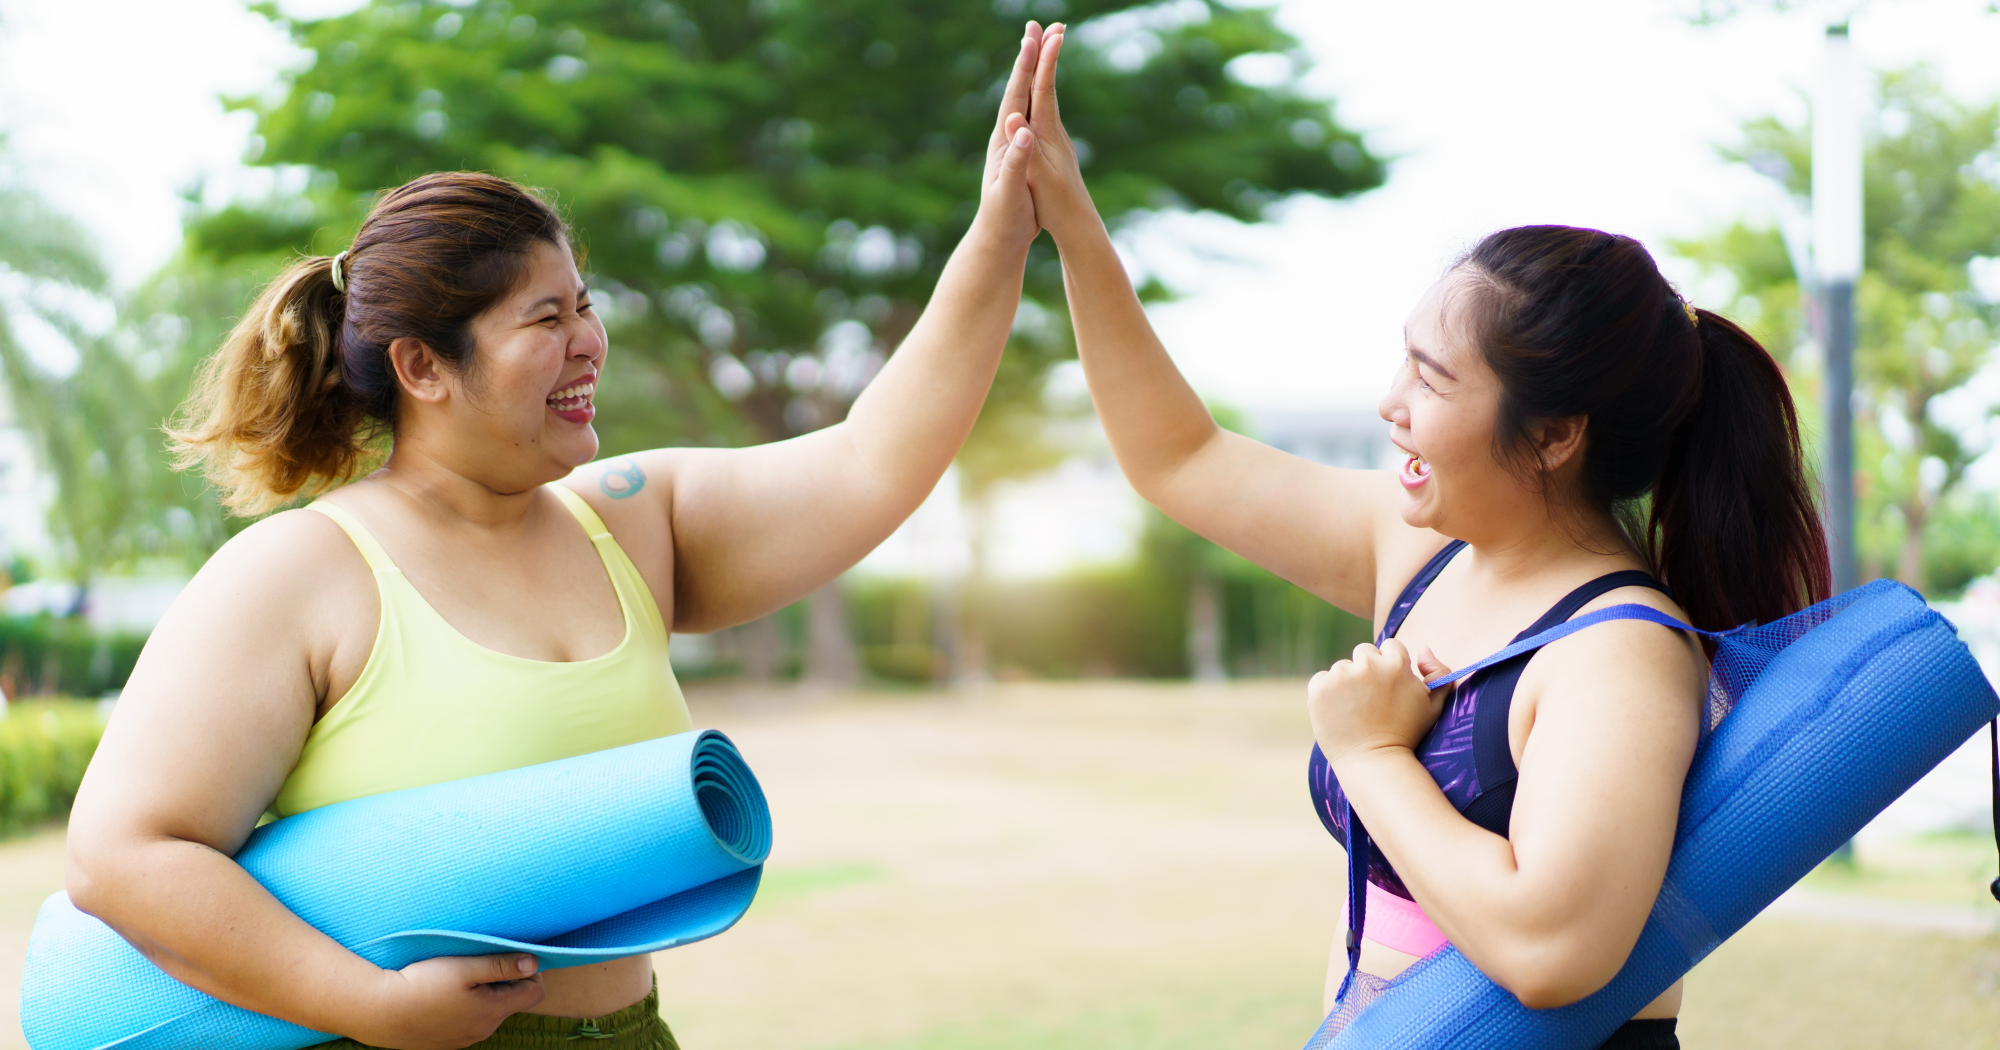 Exercise Strategies for Managing PCOS